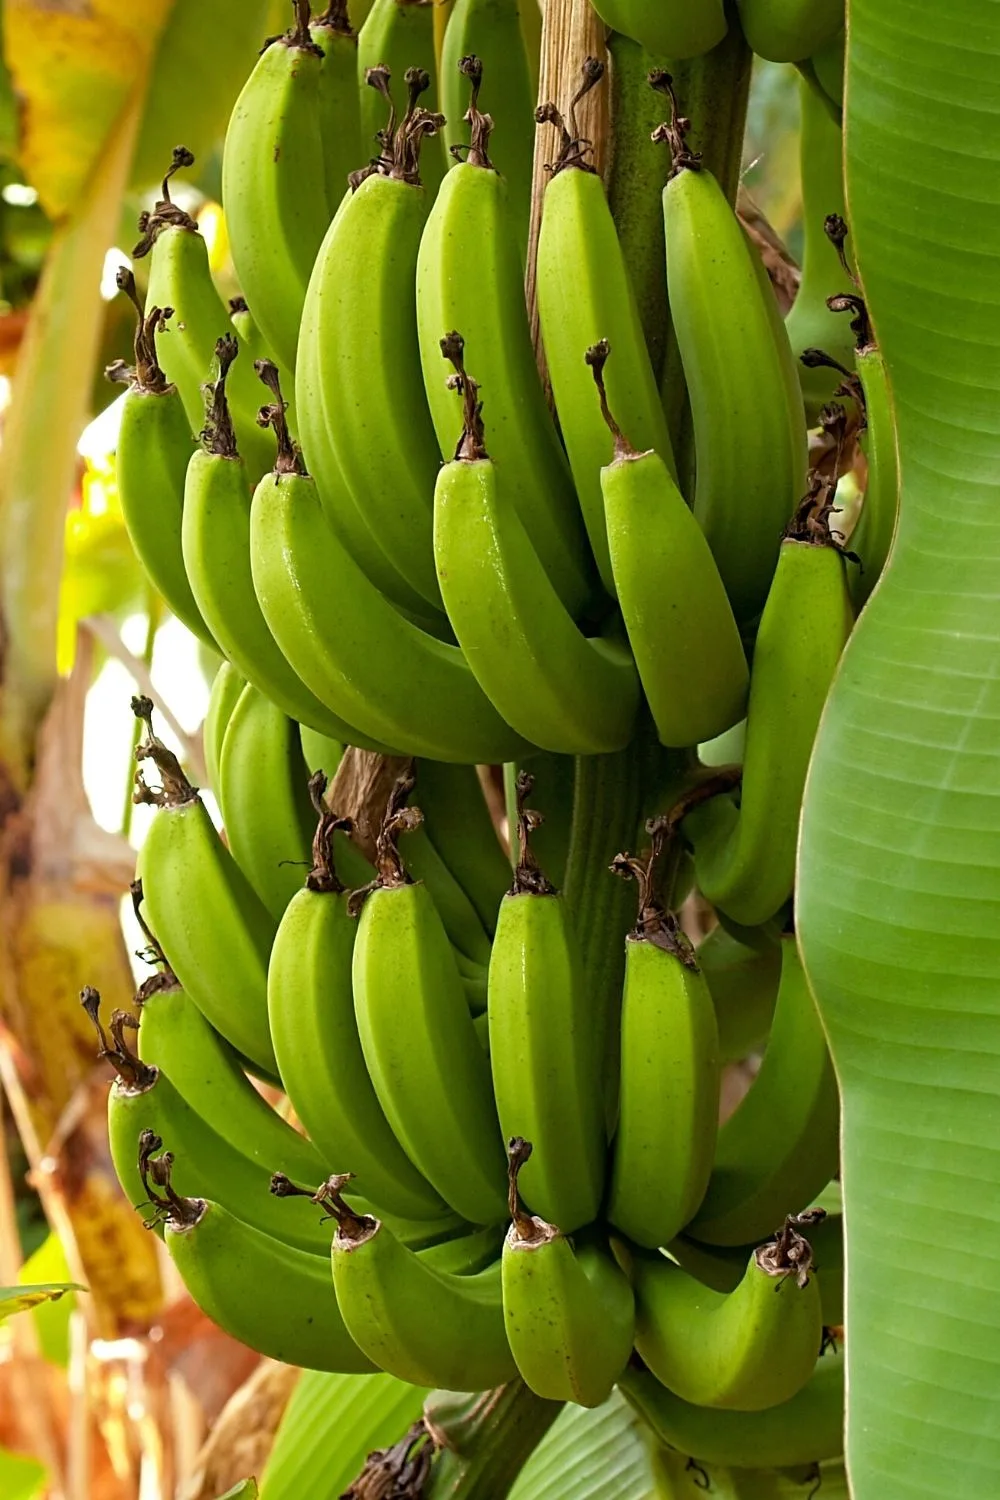 Now, if you're raring to add an edible plant to your southeast facing garden, Japanese Banana is a great choice